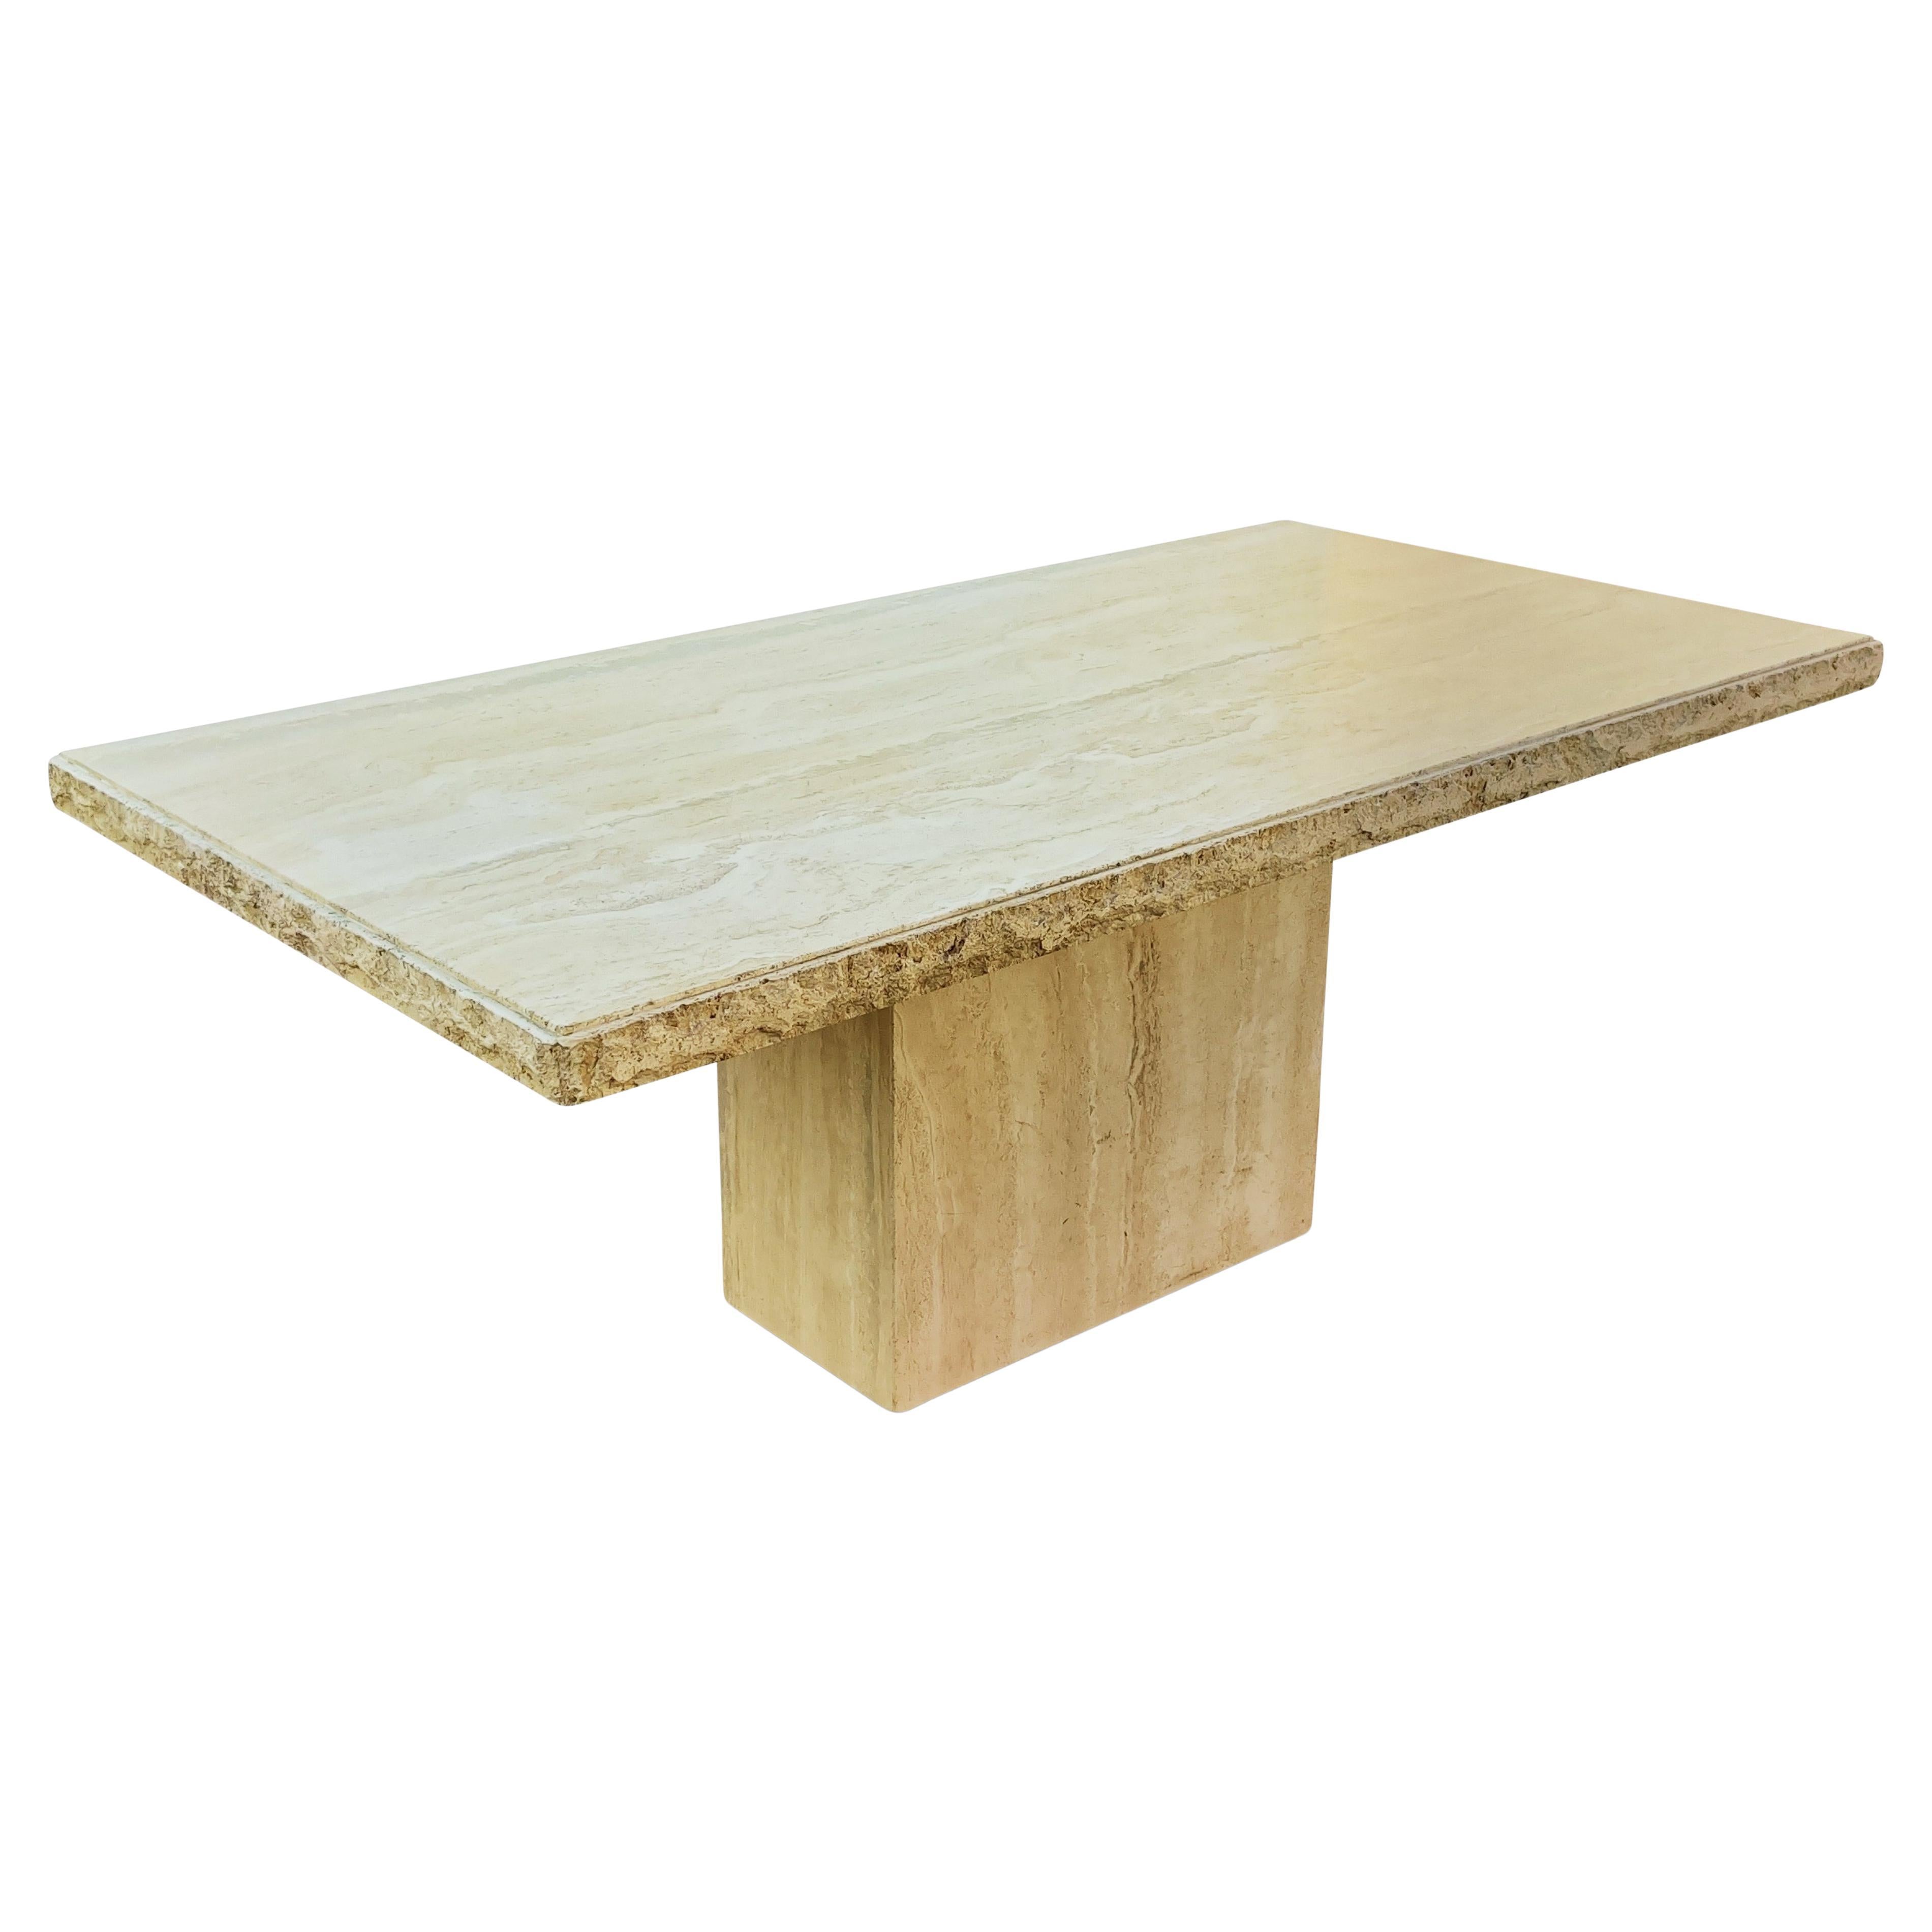 Large Italian Marble Travertine Dining Table, Desk, Polished & Chip Carved Top For Sale